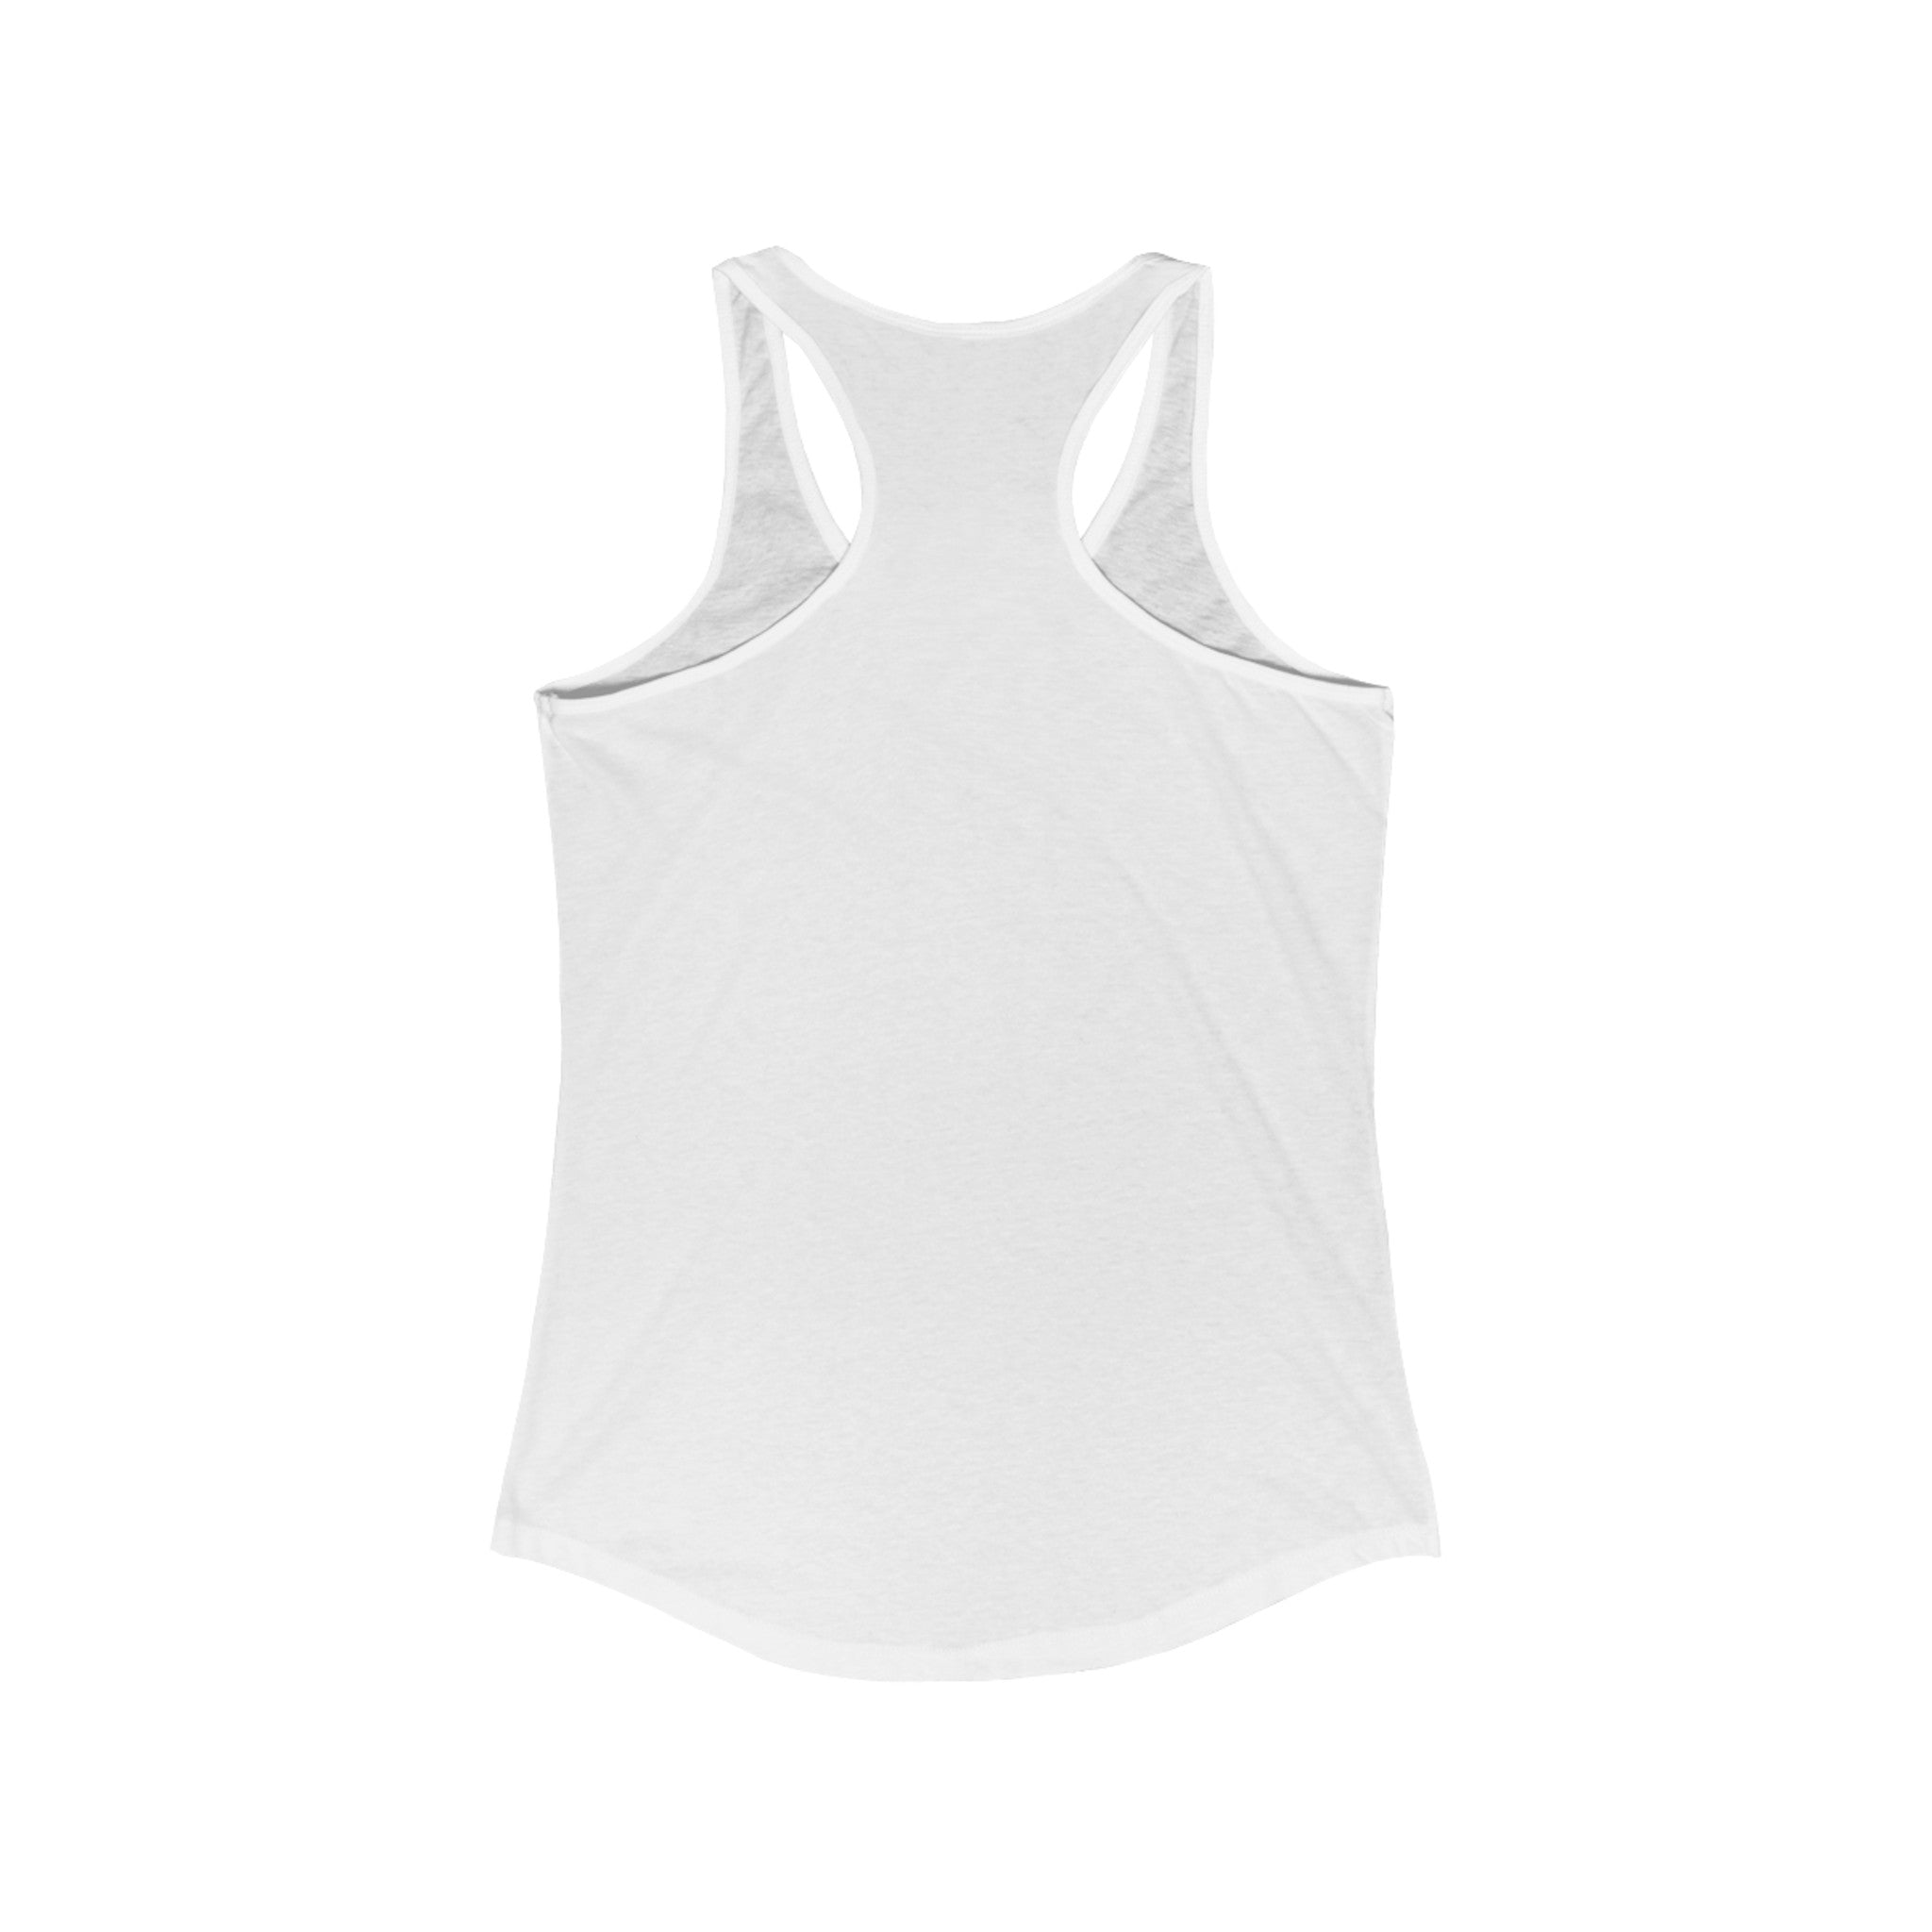 A plain white Si-S Light Pendant - Women's Racerback Tank, perfect for an active lifestyle, shown from the back.